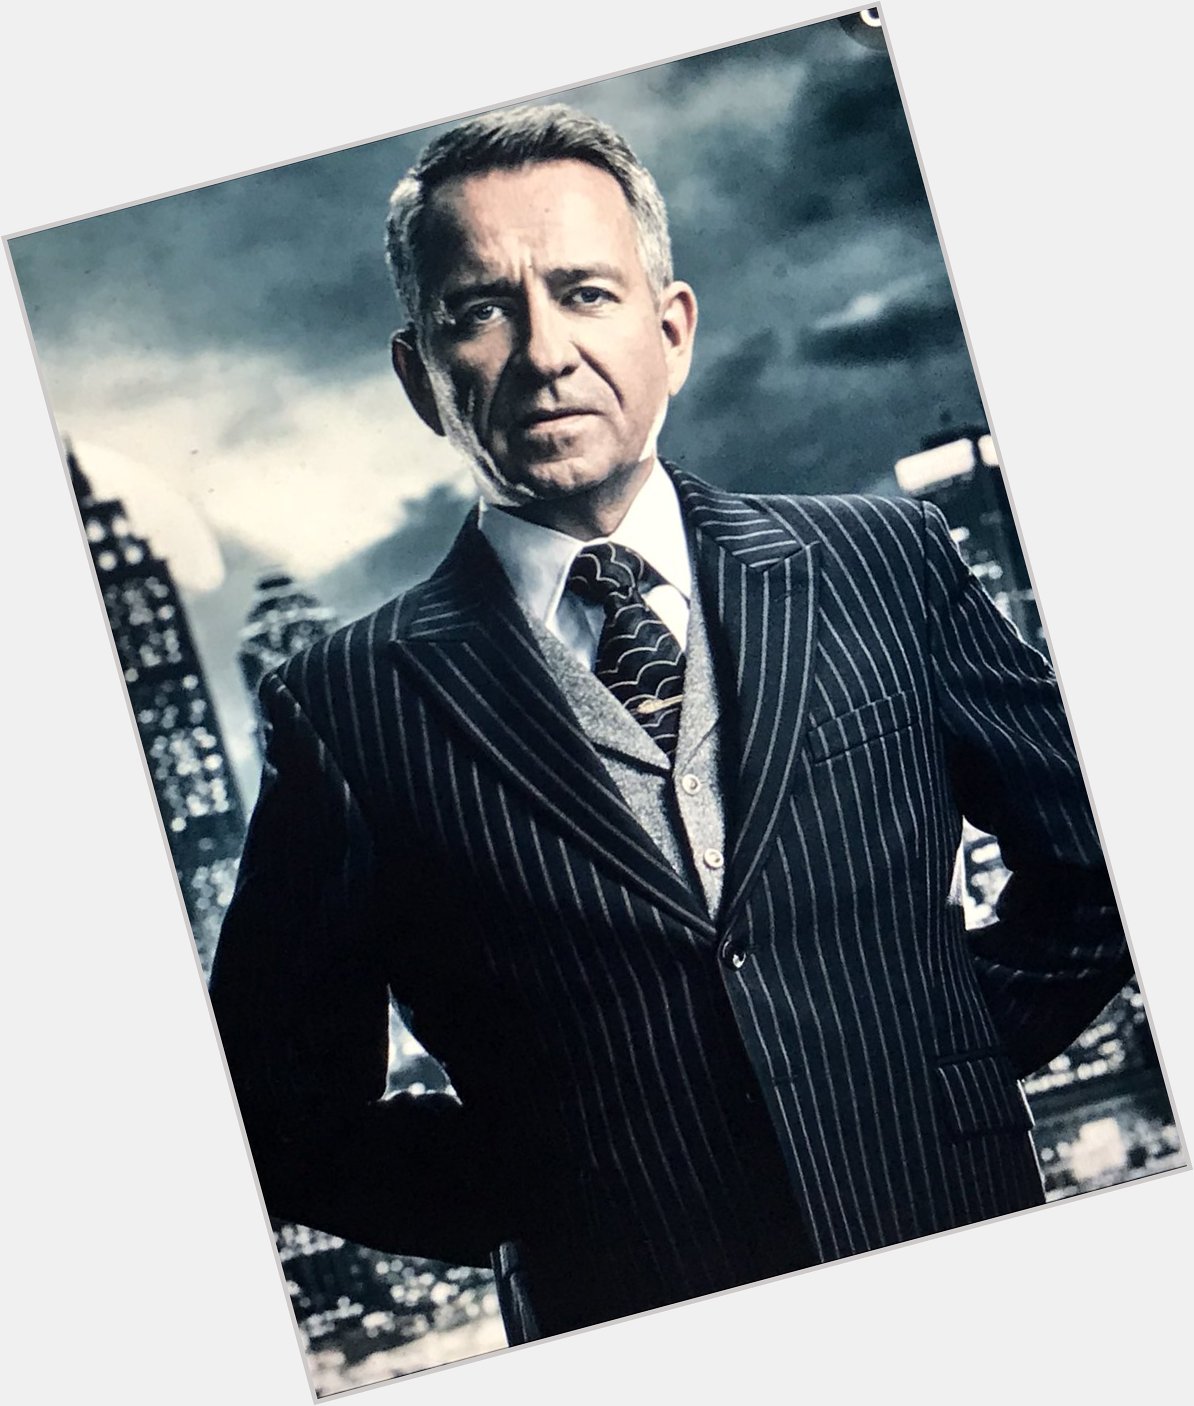 I would like to wish British actor and producer Sean Pertwee a happy 58th birthday today 